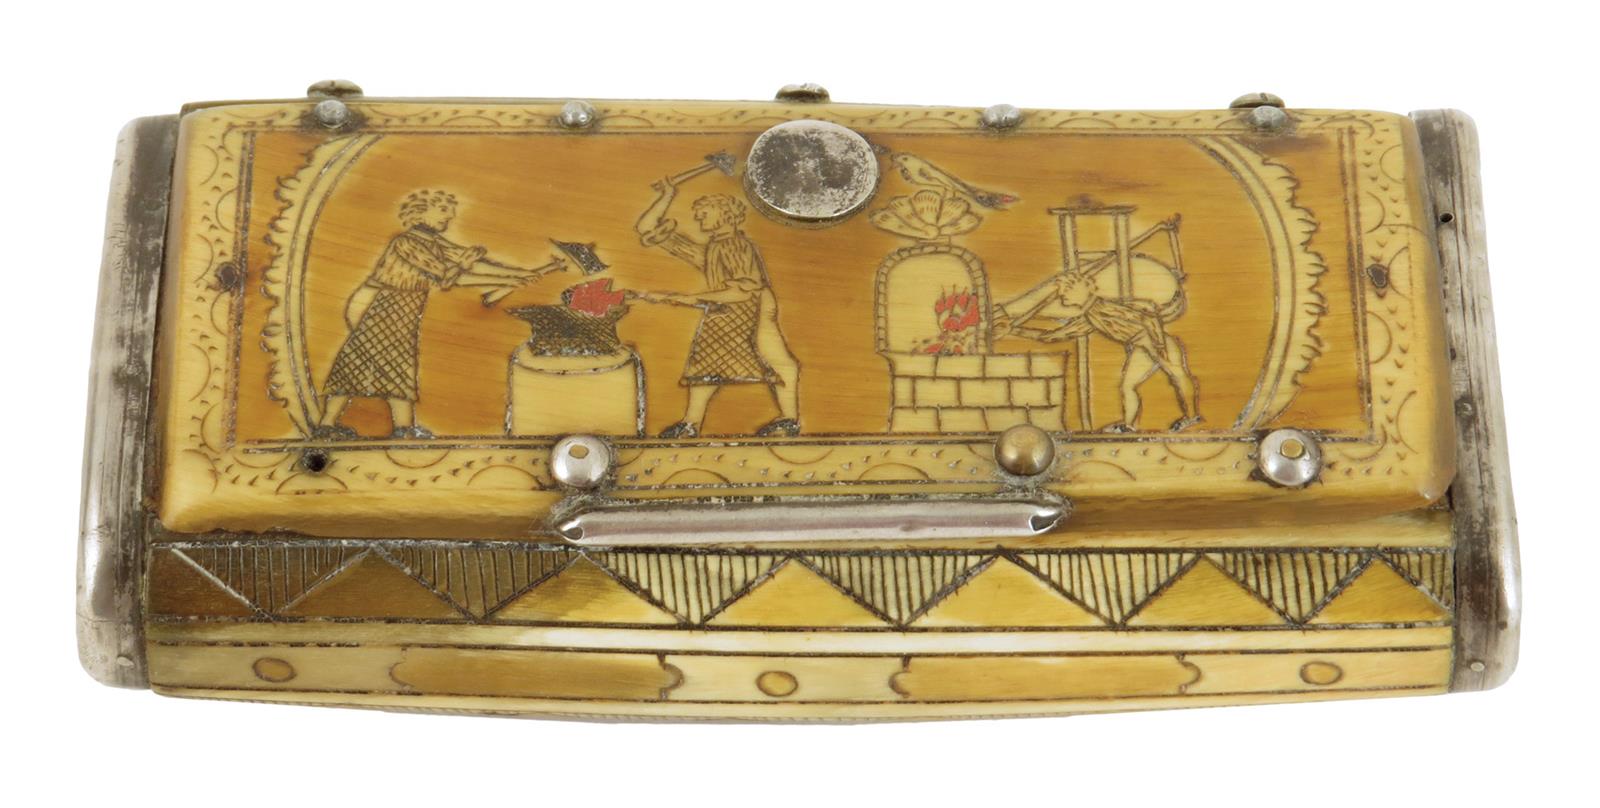 An engraved horn and white metal mounted snuff box, the hinged lid decorated with a blacksmith's